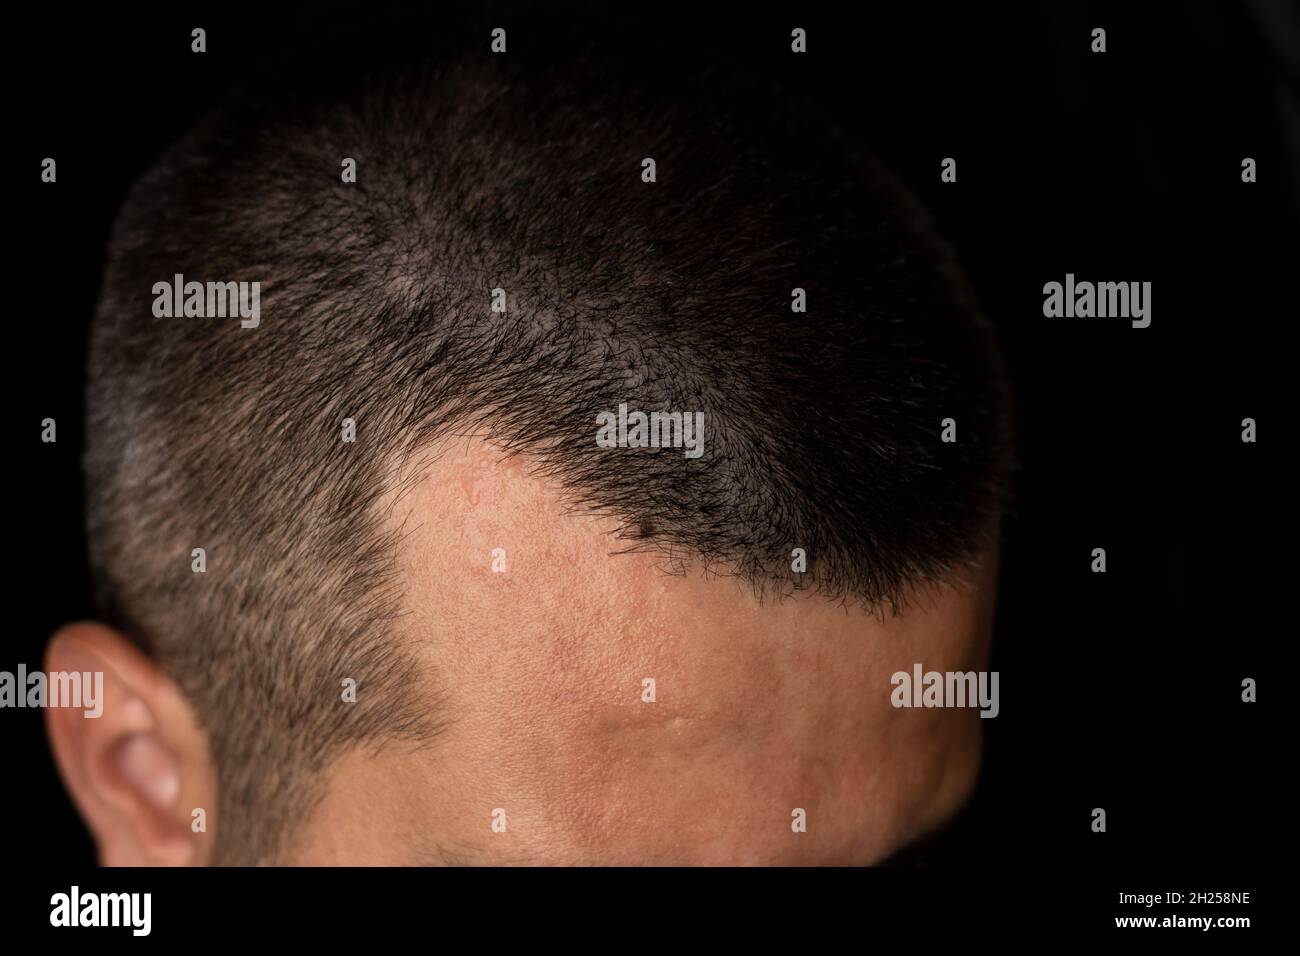 Close up photo of a man with hair loss Stock Photo